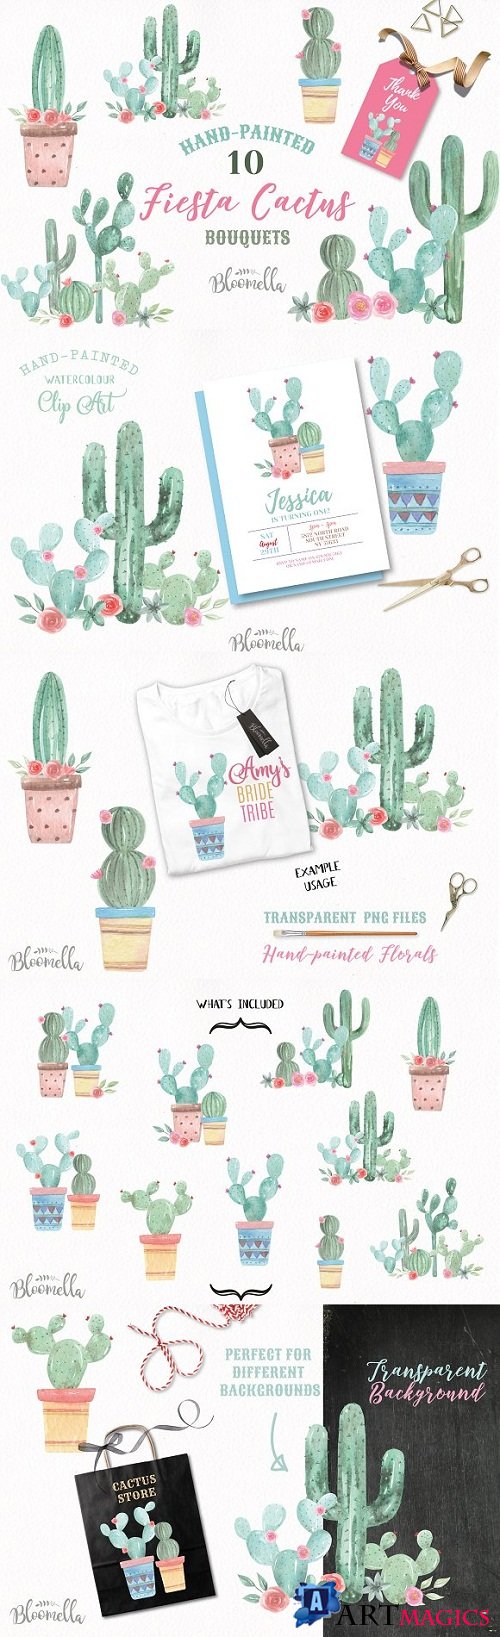 Cactus Watercolor Painted Clipart - 3087354